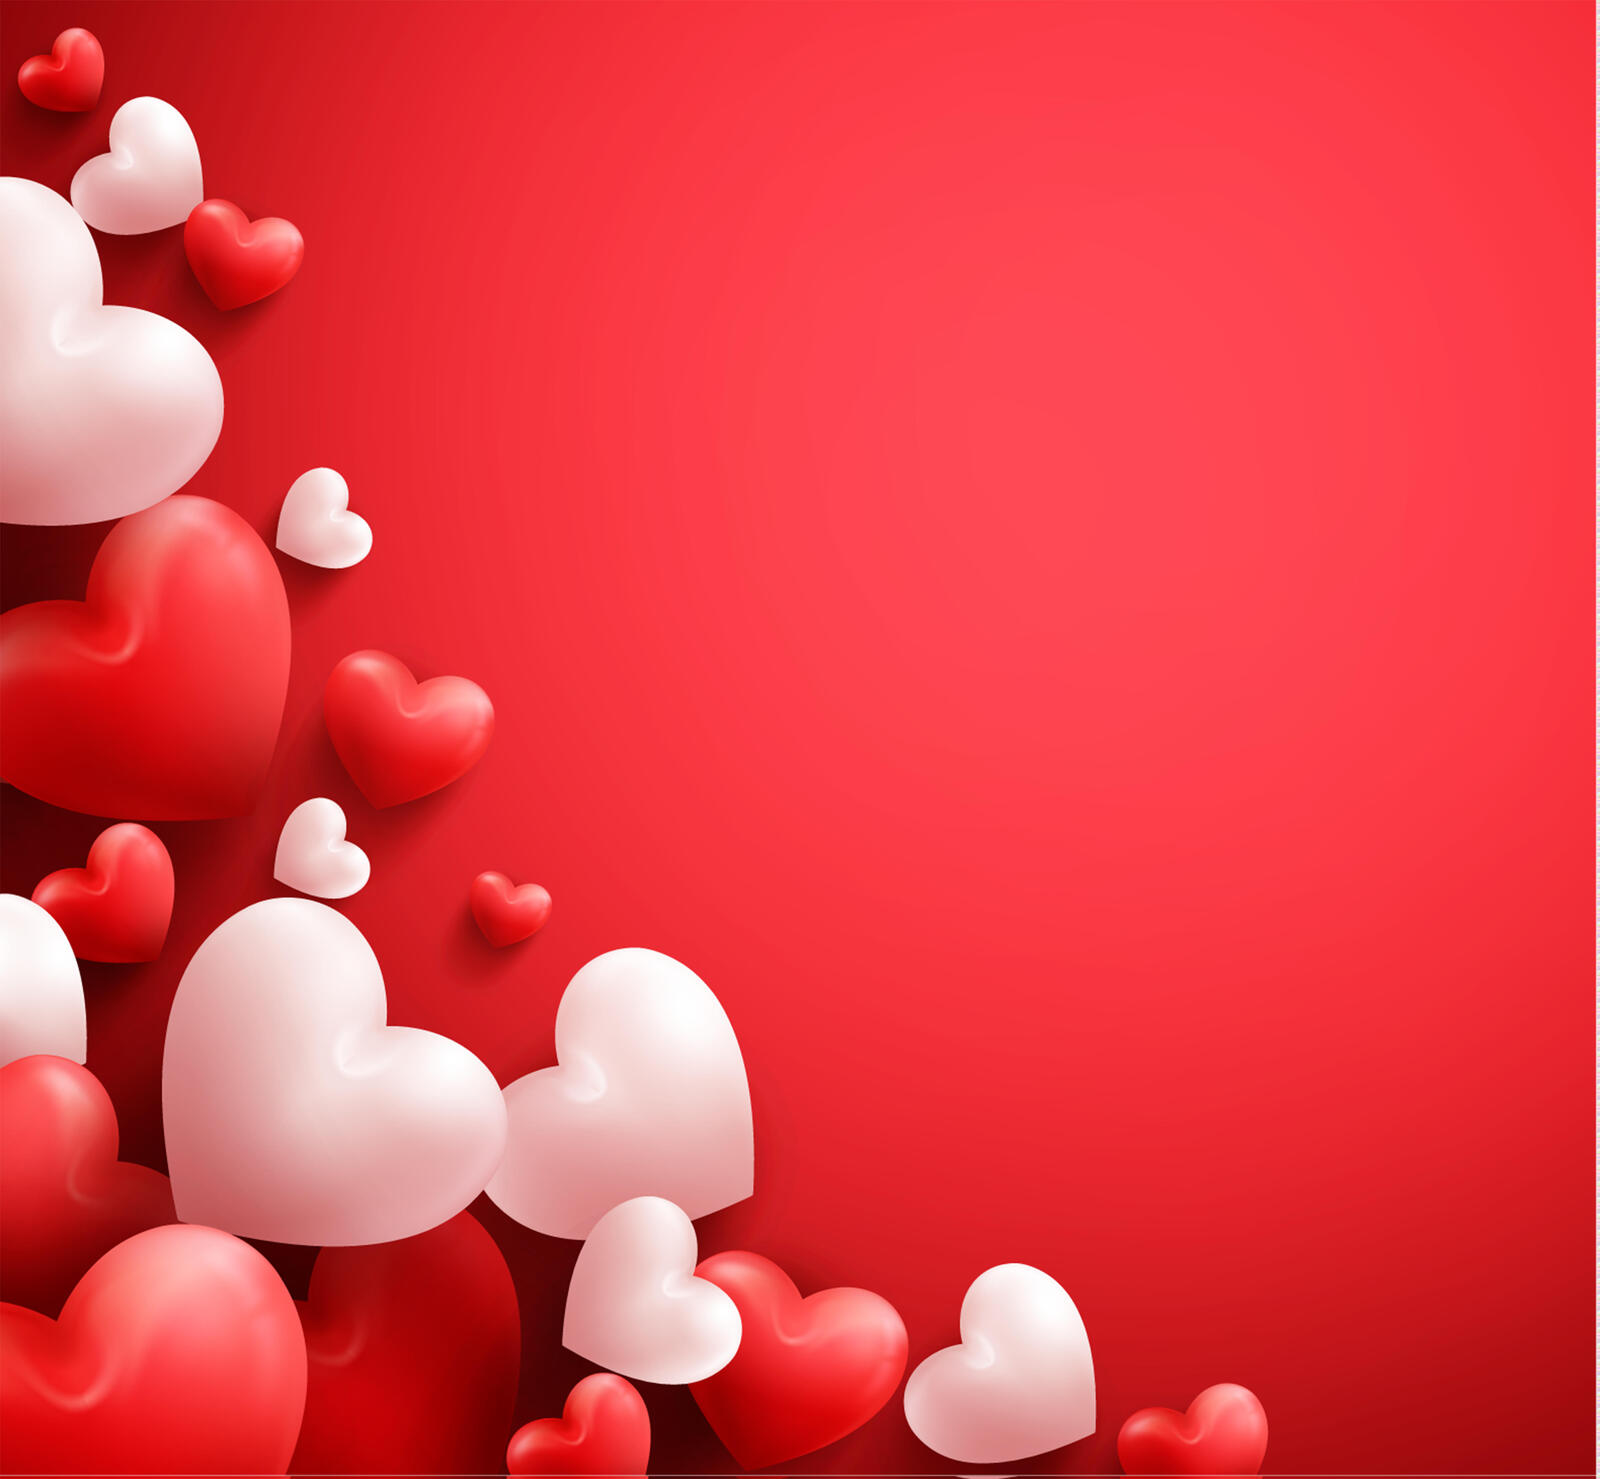 Wallpapers holidays hearts a day of lovers on the desktop